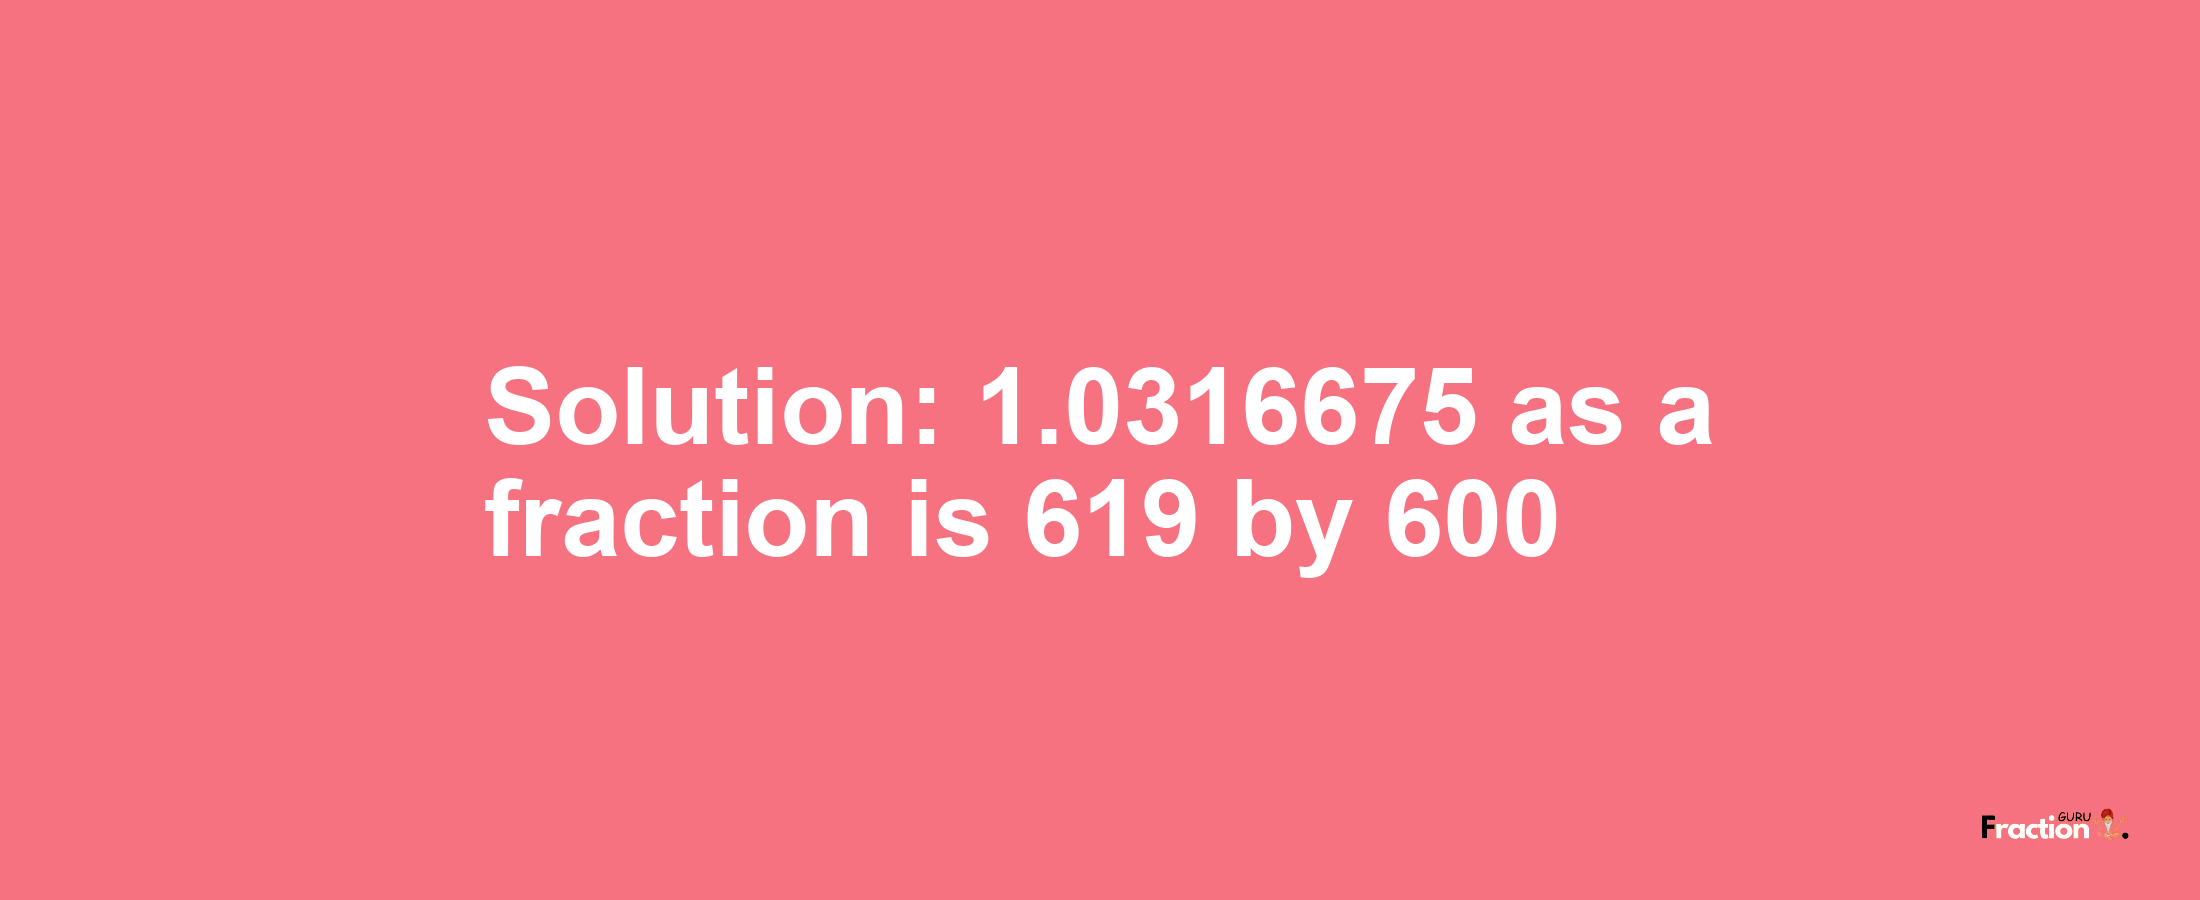 Solution:1.0316675 as a fraction is 619/600